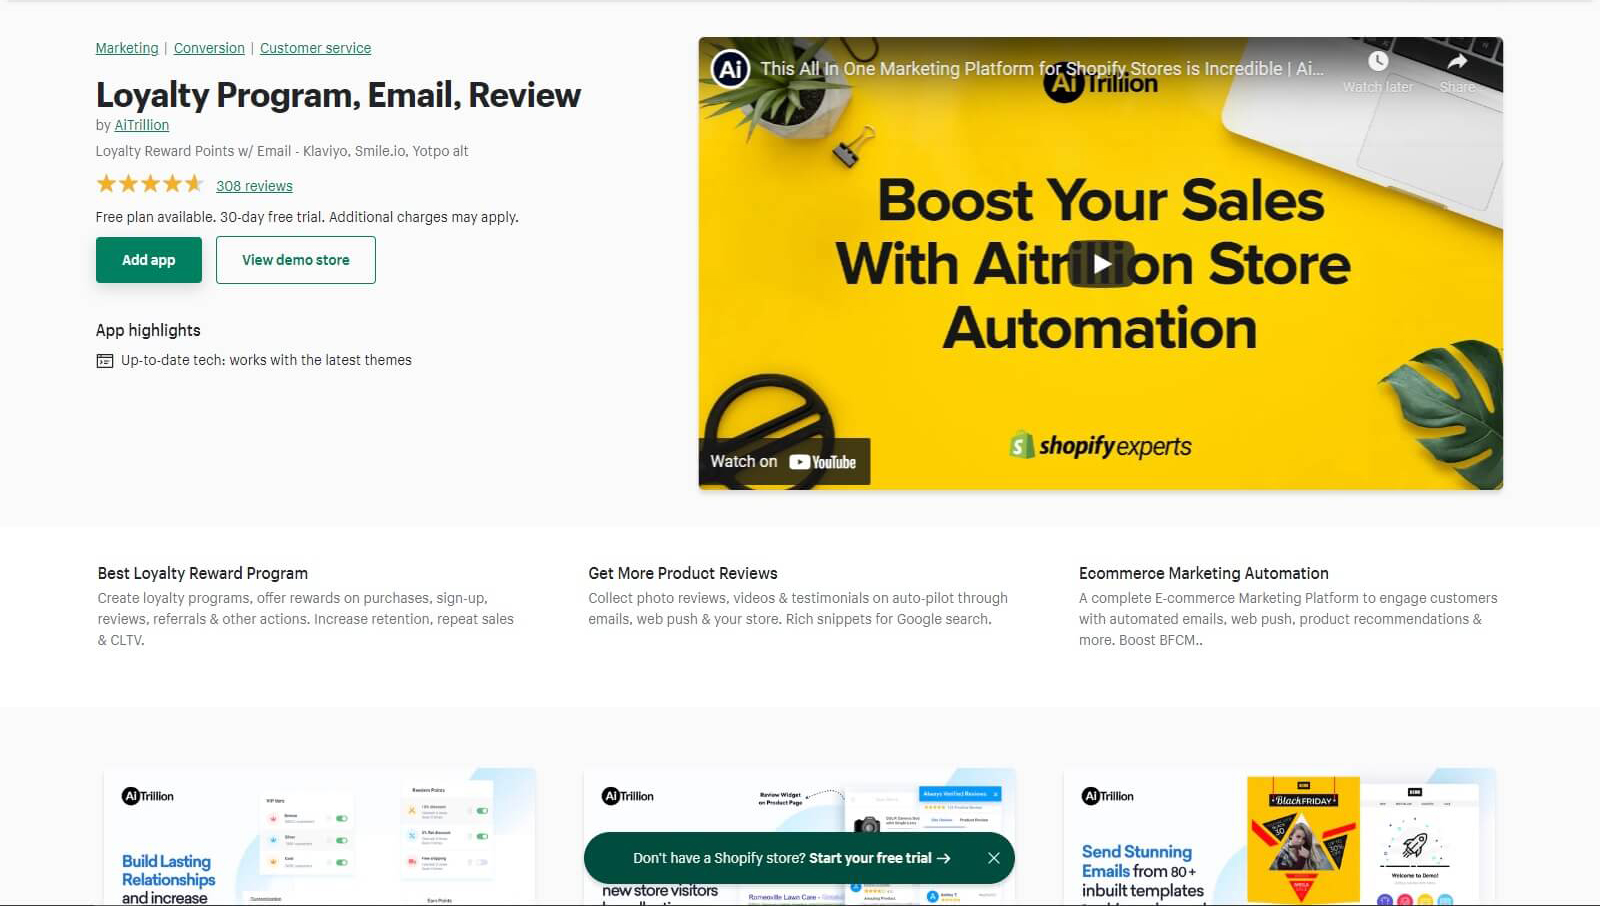 Google &  - Drive sales with the Google &  app on Shopify